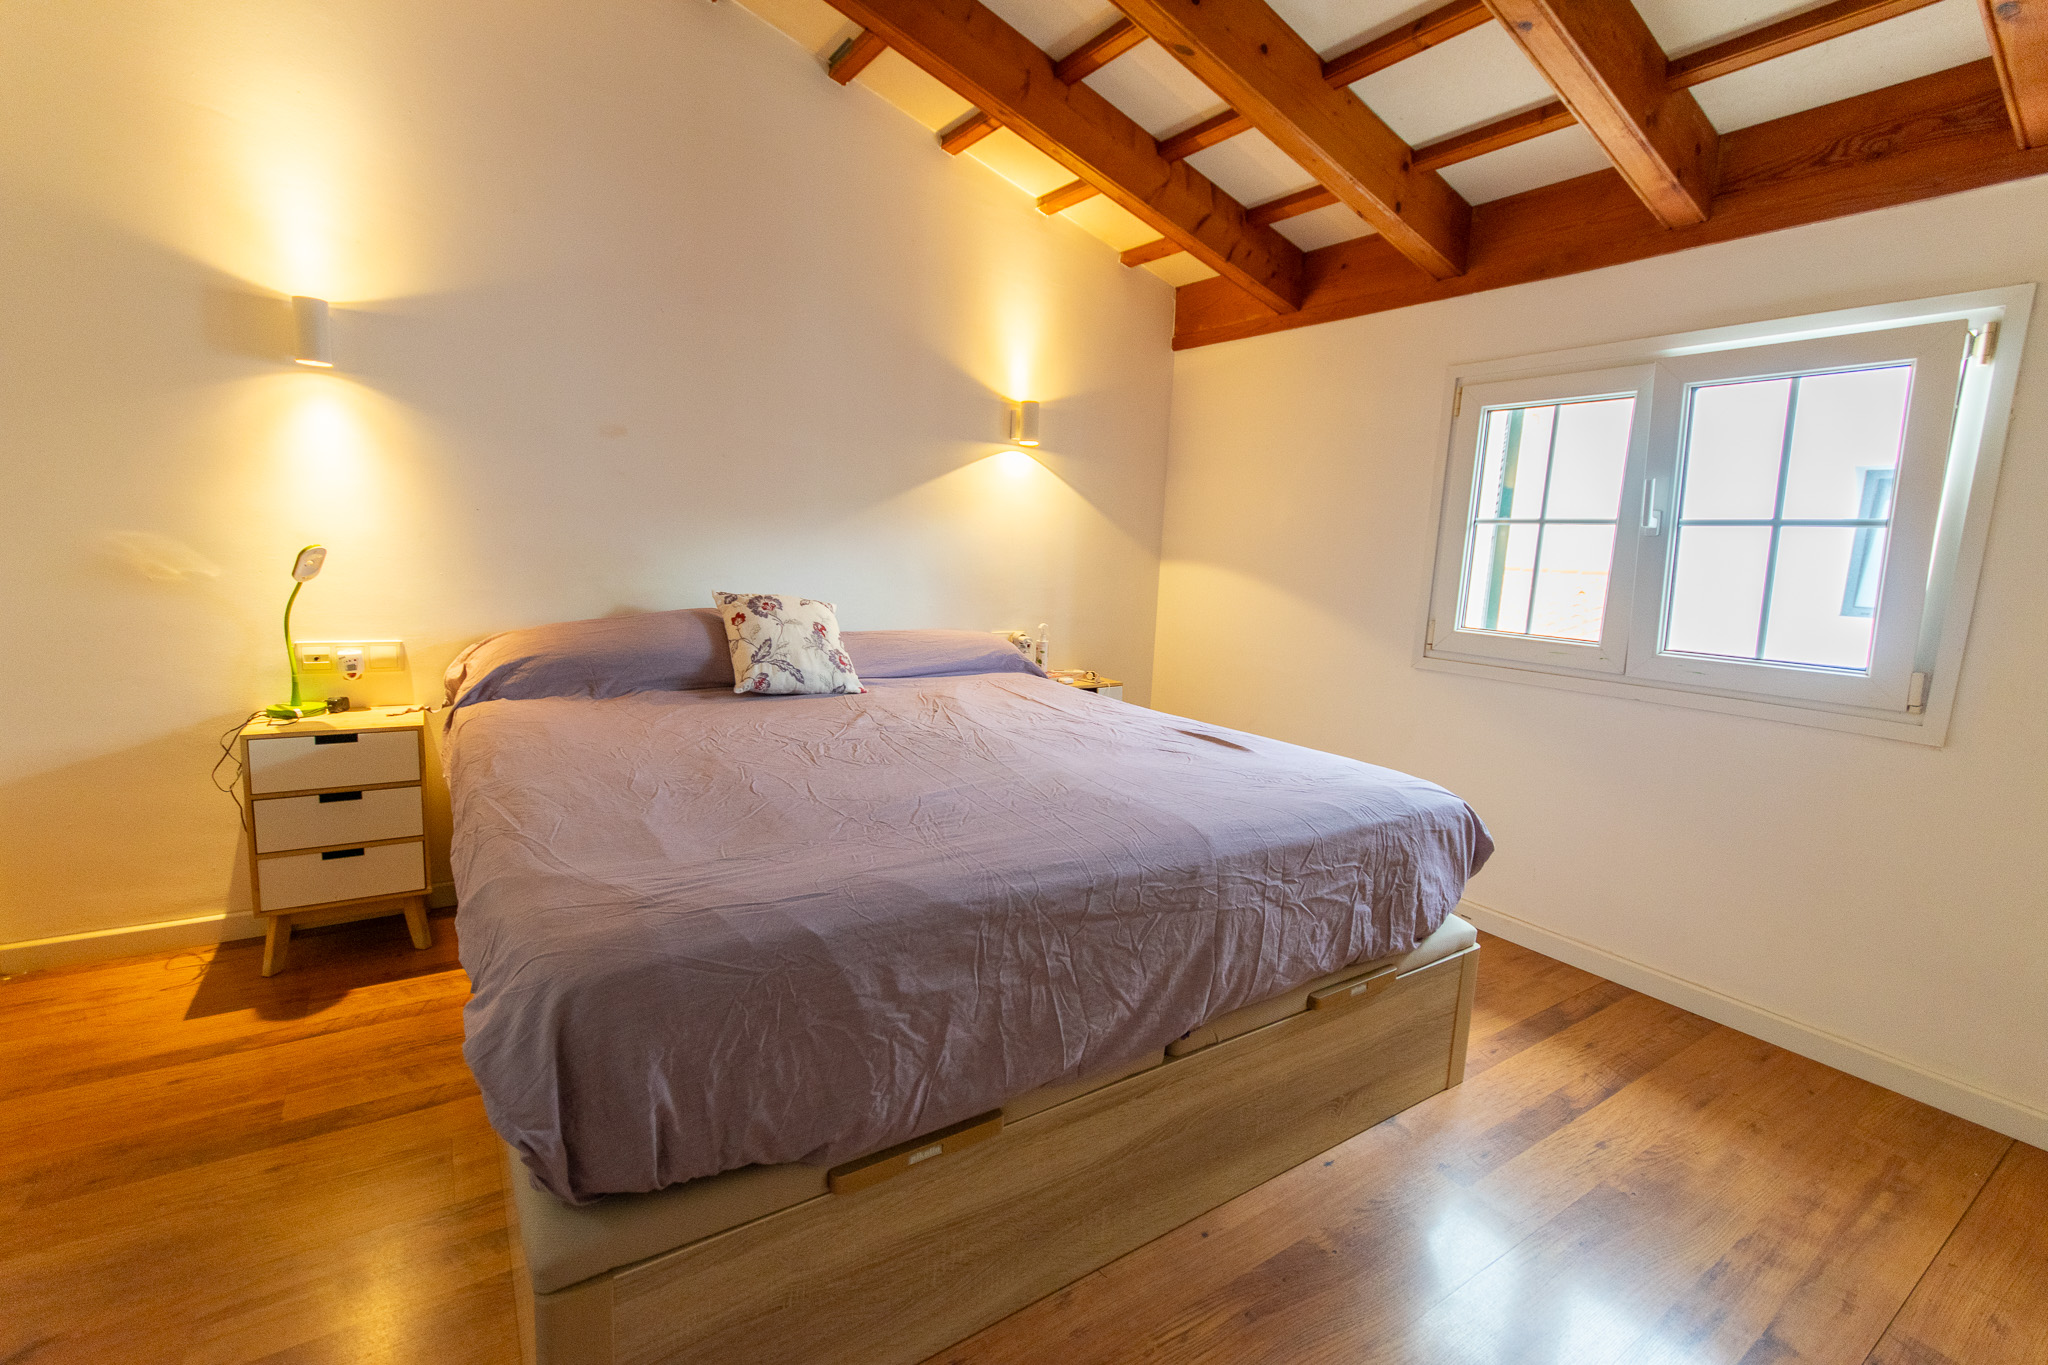 Duplex master bedroom with large terrace in Mercadal